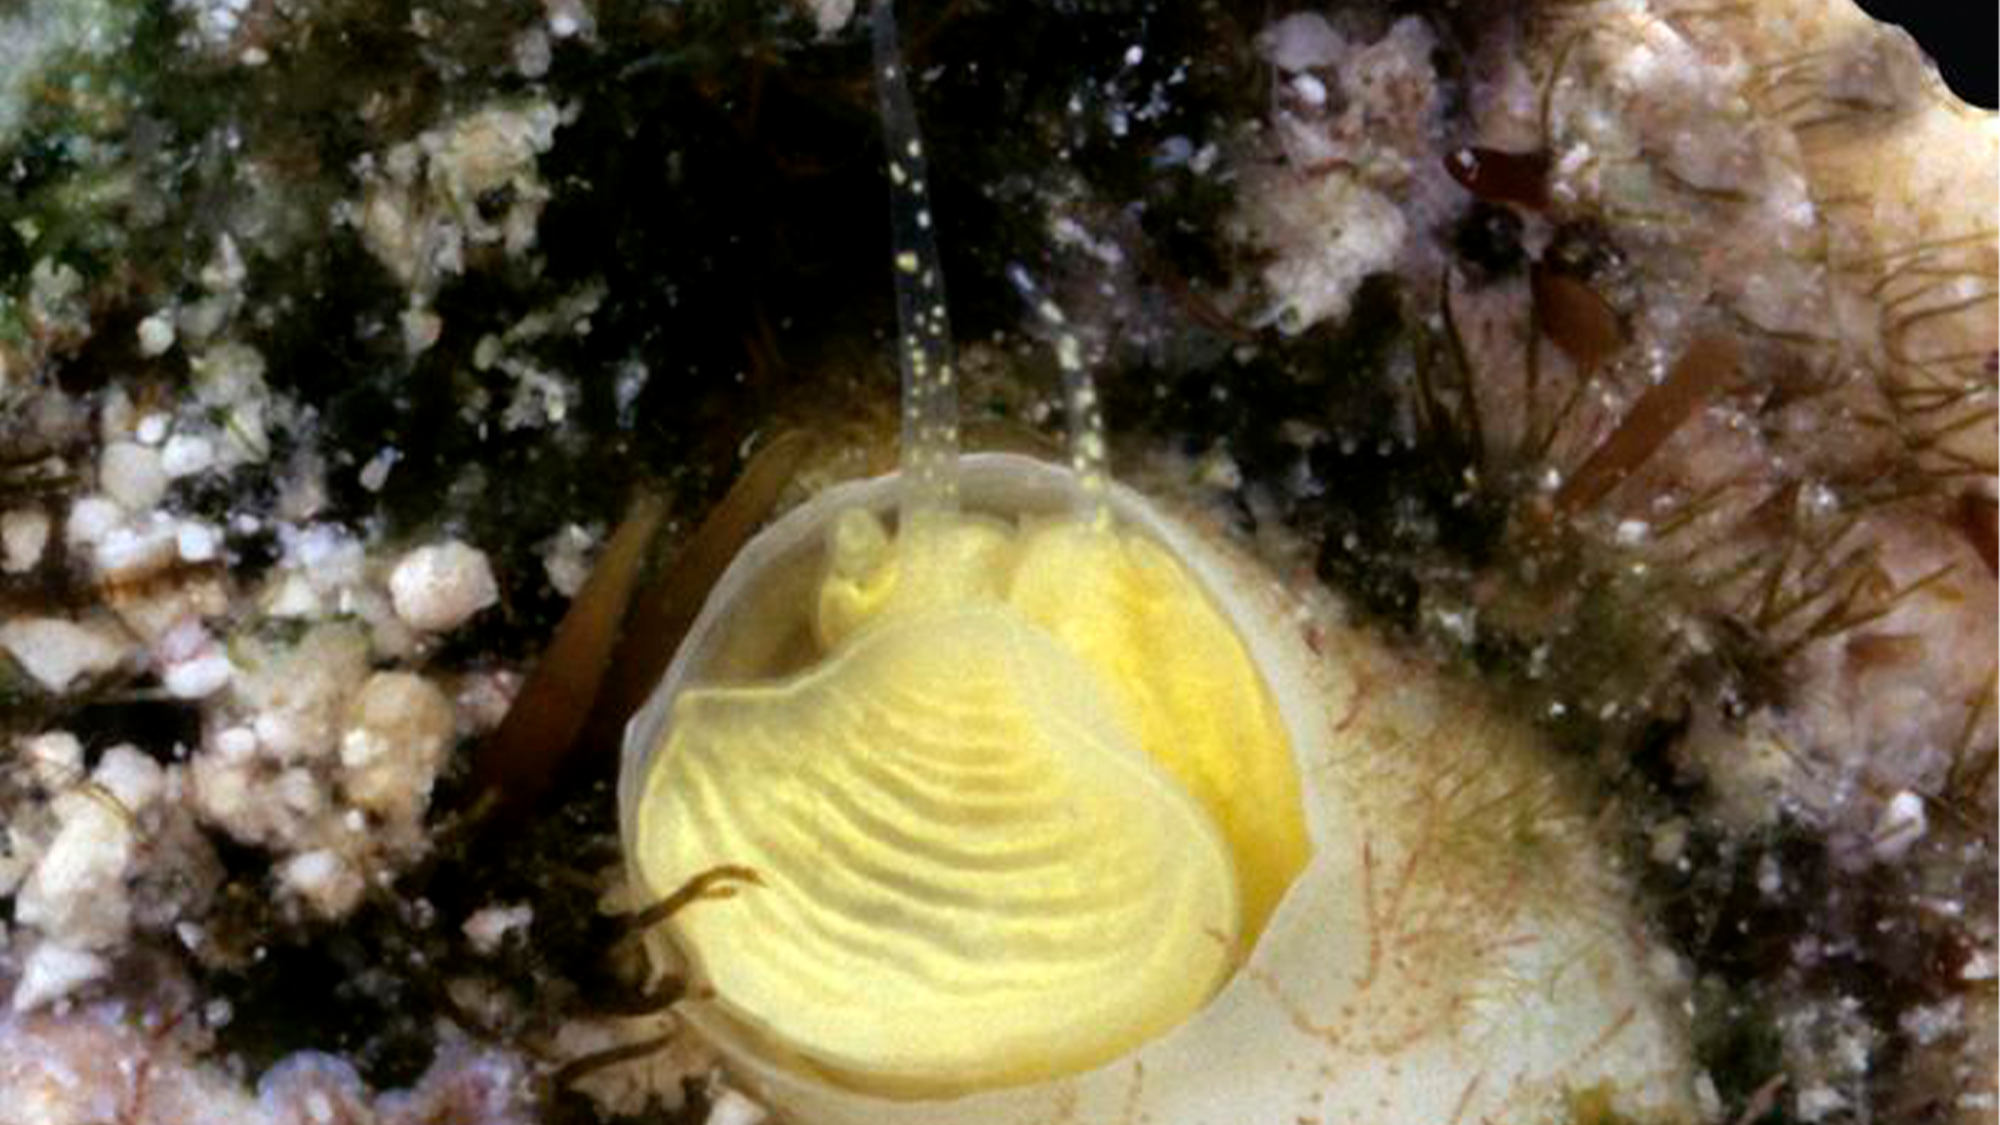 An underwater closeup of Cayo margarita (a new species) in the coral reef of the Florida Keys. Note the two long tentacles, used by the snail to spread the mucus net for feeding.